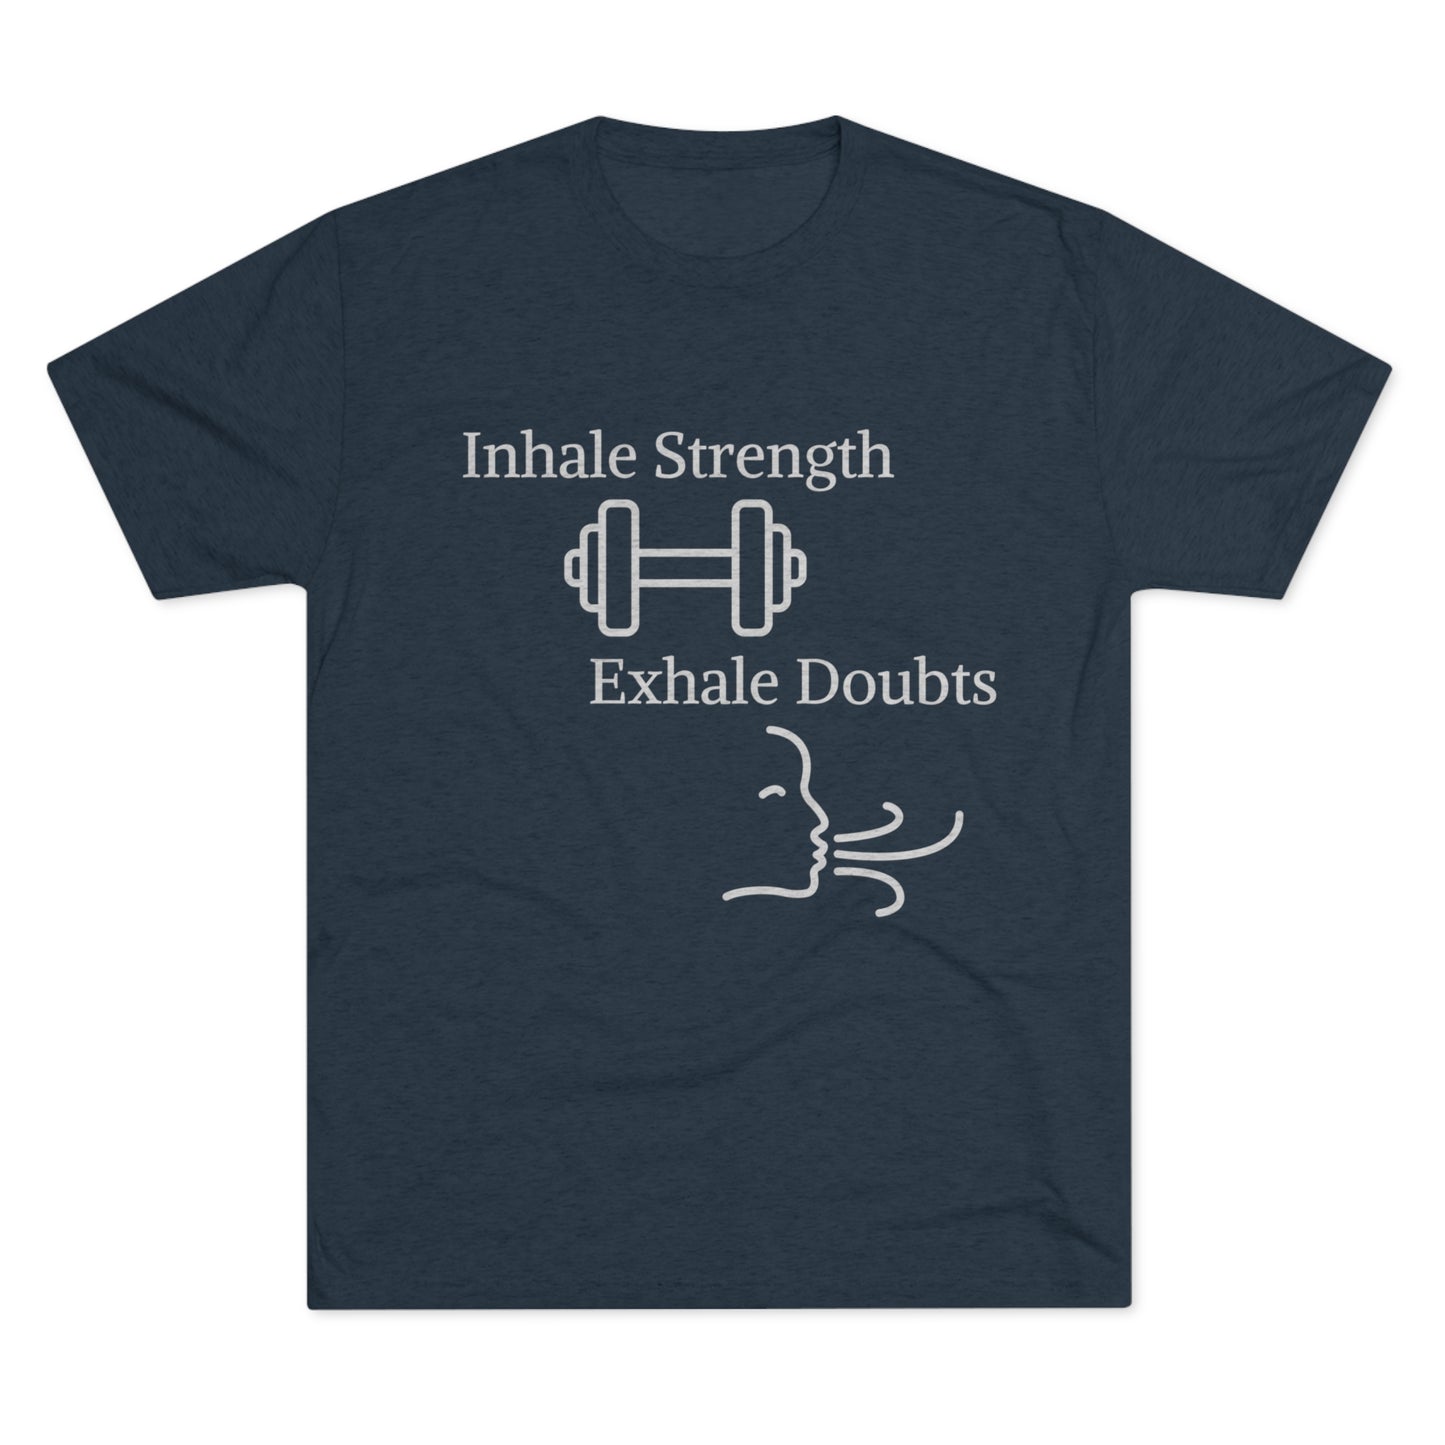 Navy blue Inhale Strength Exhale Doubt w Images t-shirt by Printify, featuring white text above a graphic of a dumbbell and stylized exhaling breath, perfect as motivational workout apparel.